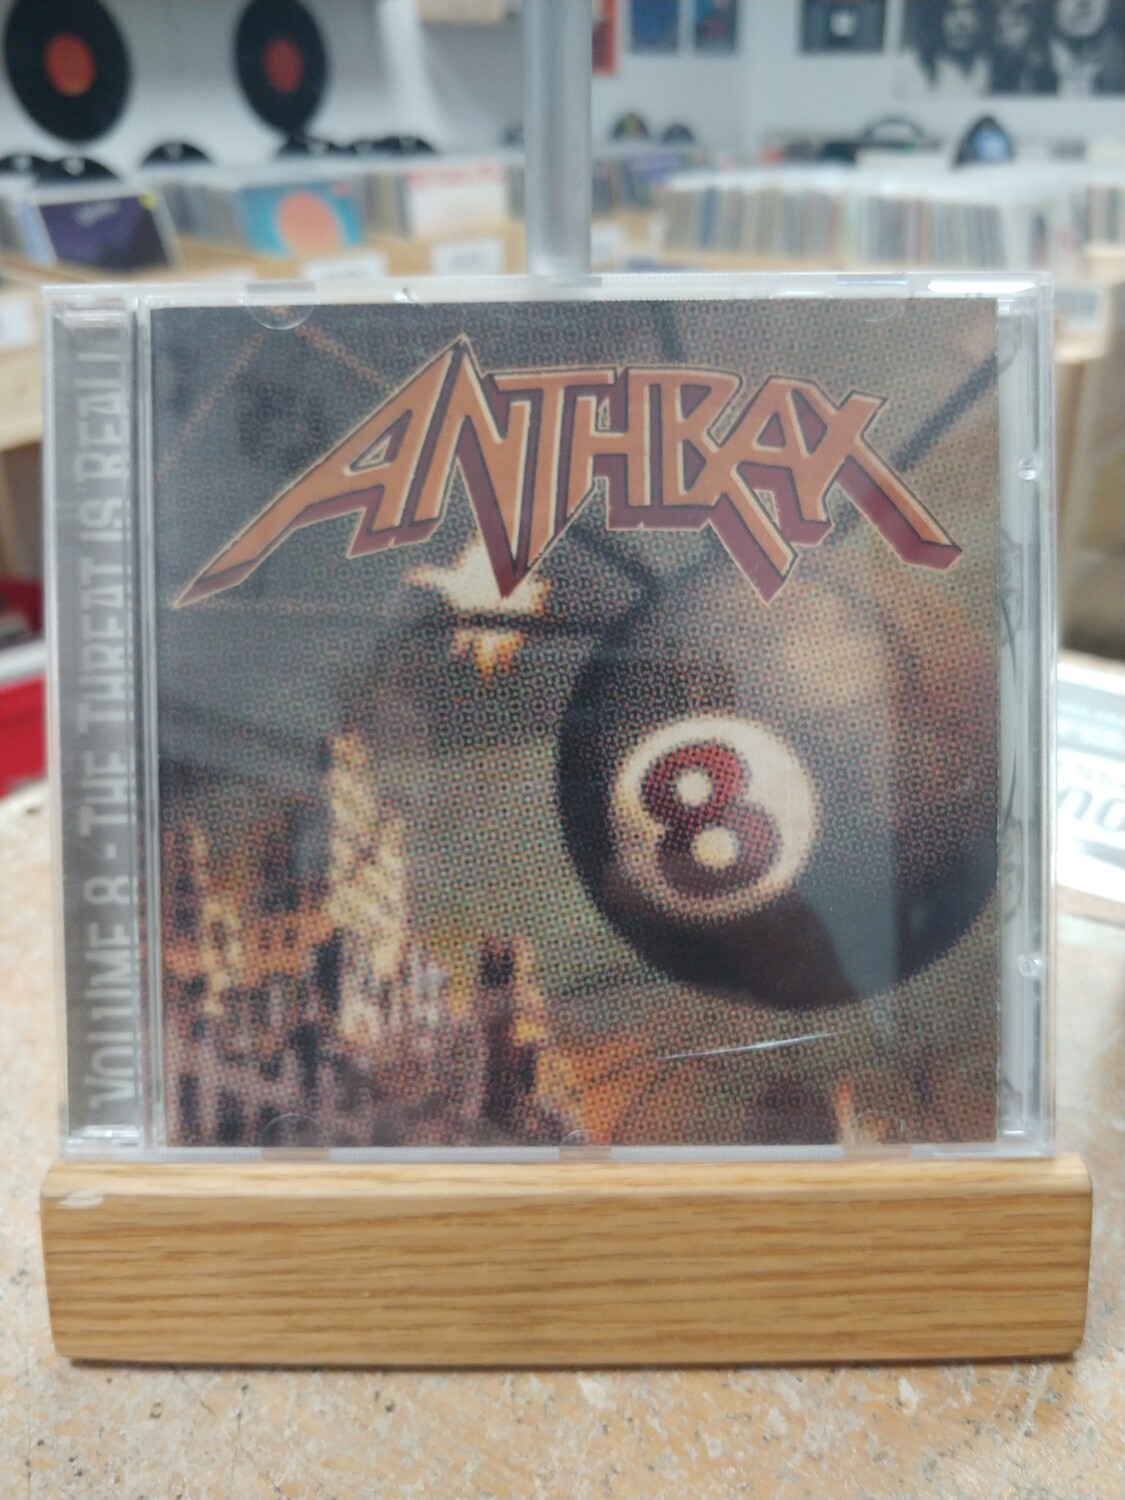 Anthrax - The treath is real (CD)